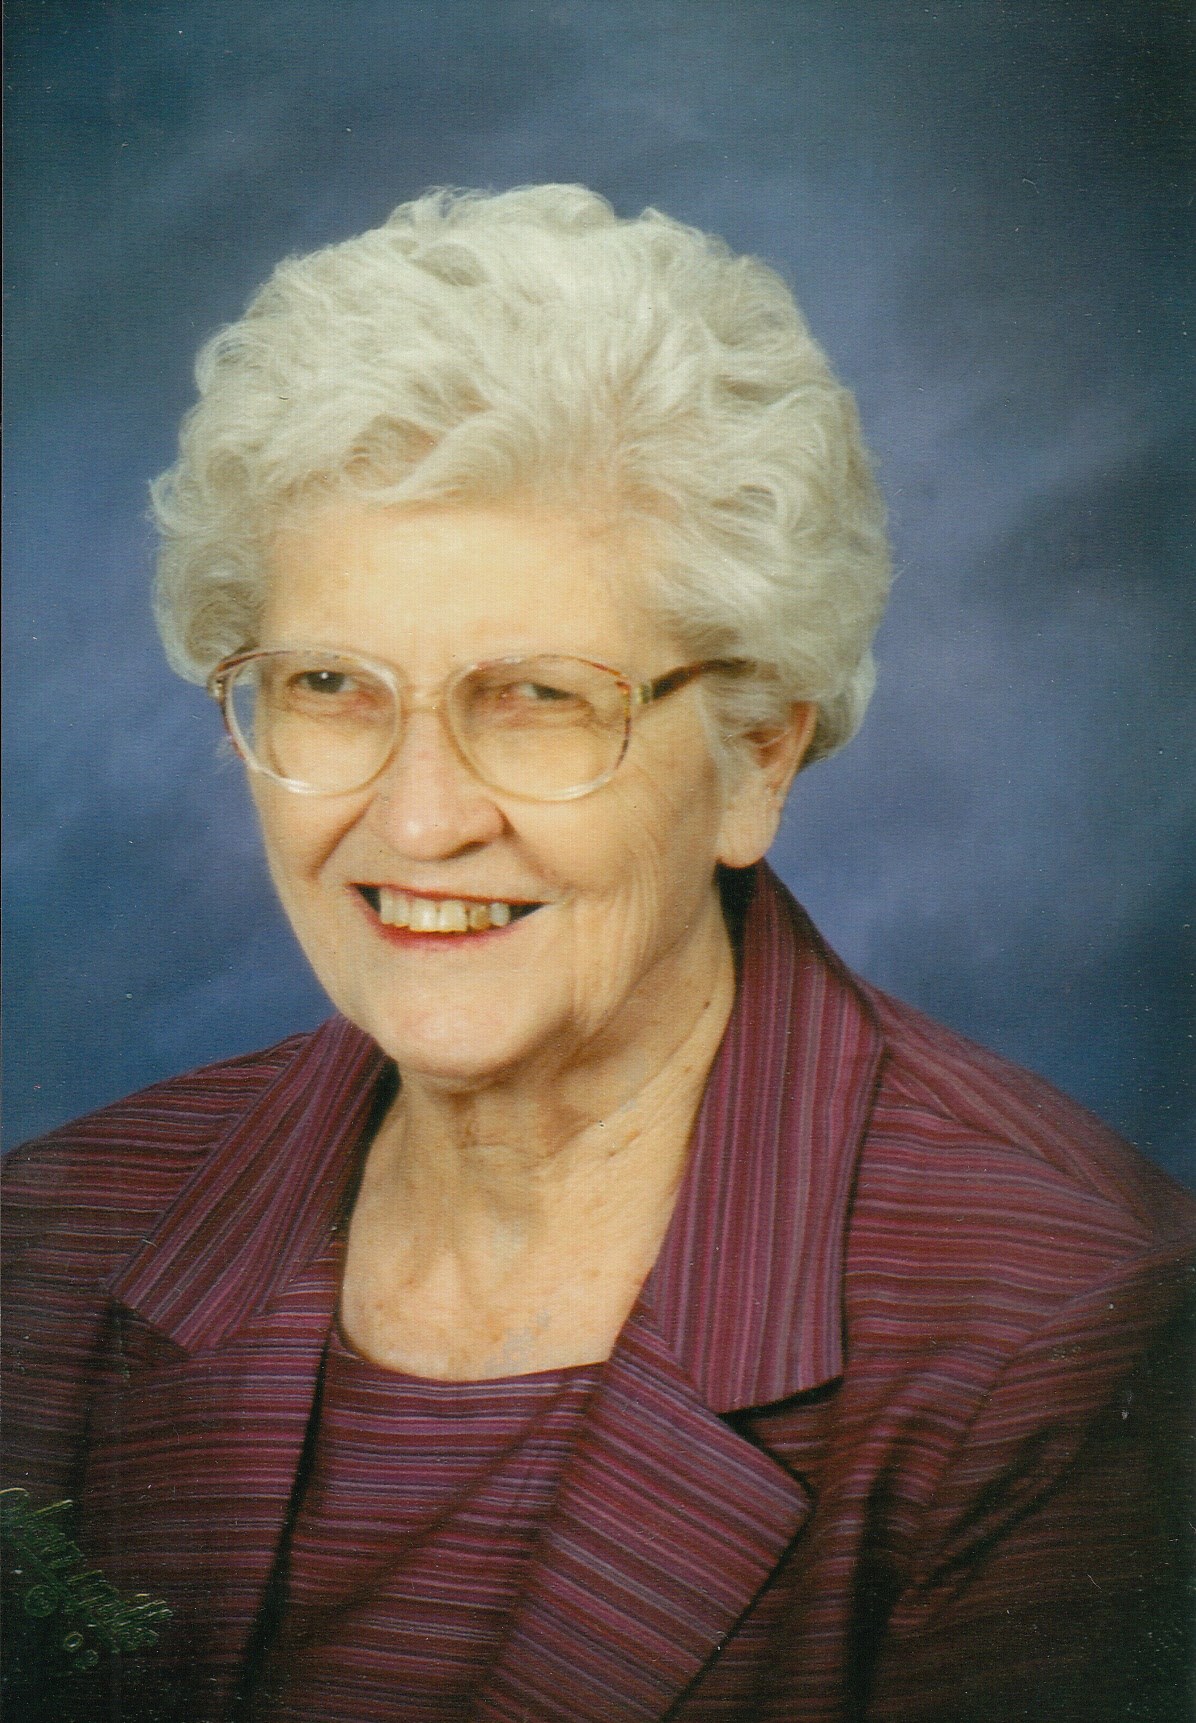 Obituary of Gertrude Emma Fritsche - 12/08/2018 - From the Family